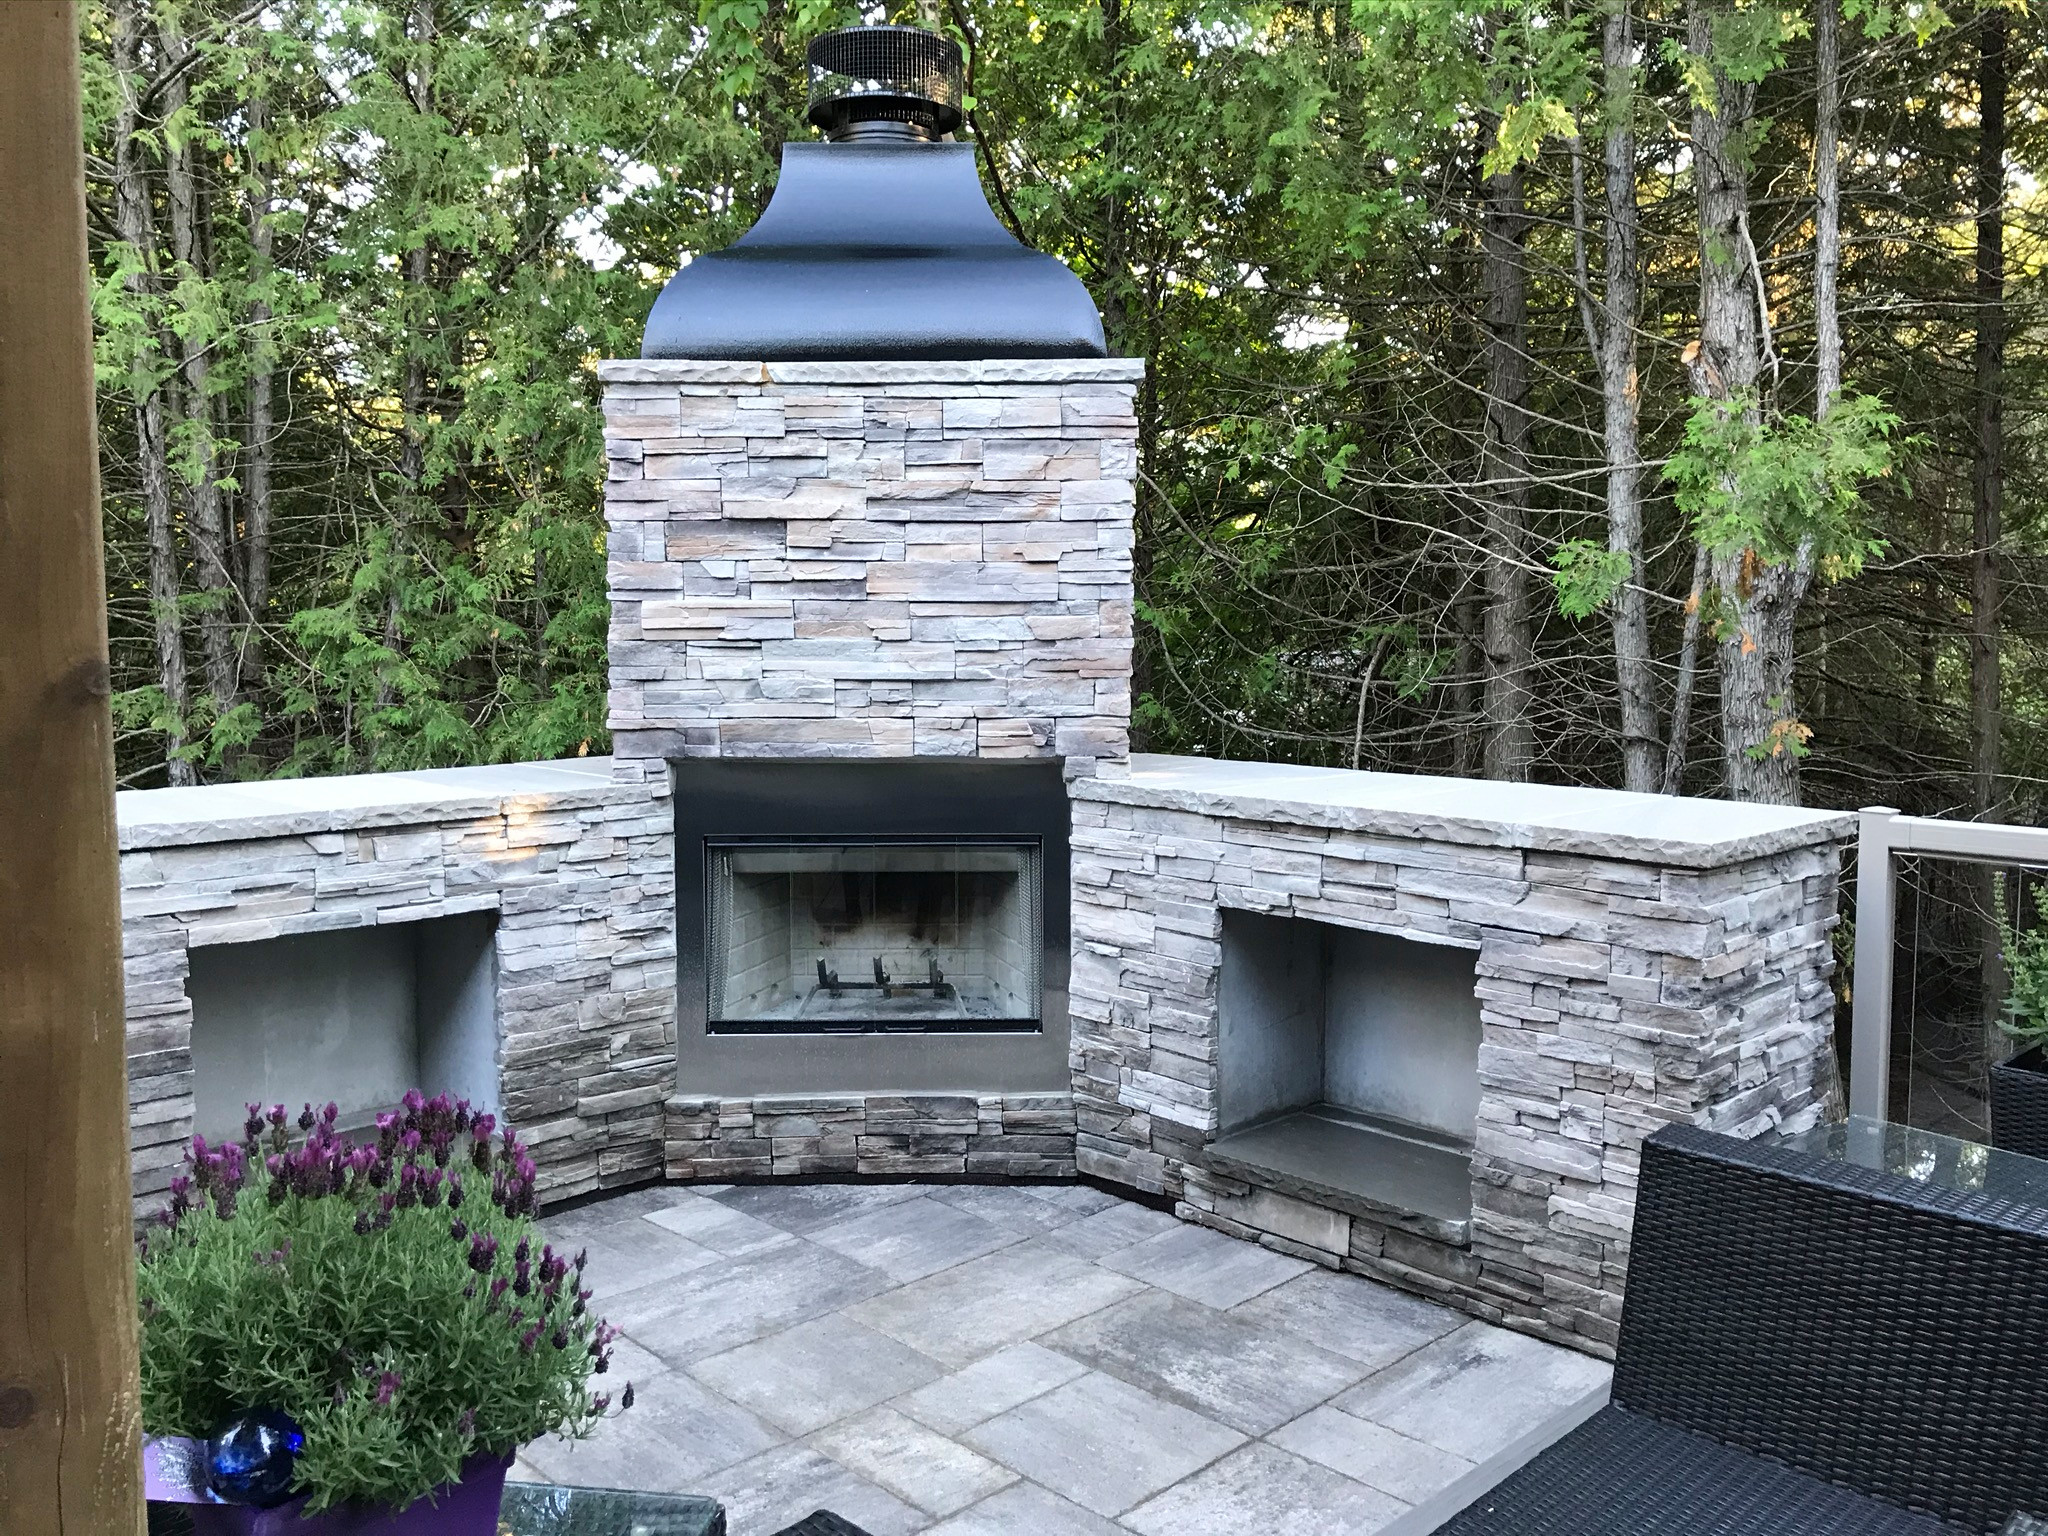 This composite deck provides a maintenance free outdoor living space complete with a fireplace and dining area. This deck doubles as a front entrance, that is if you don't get caught up enjoying the w